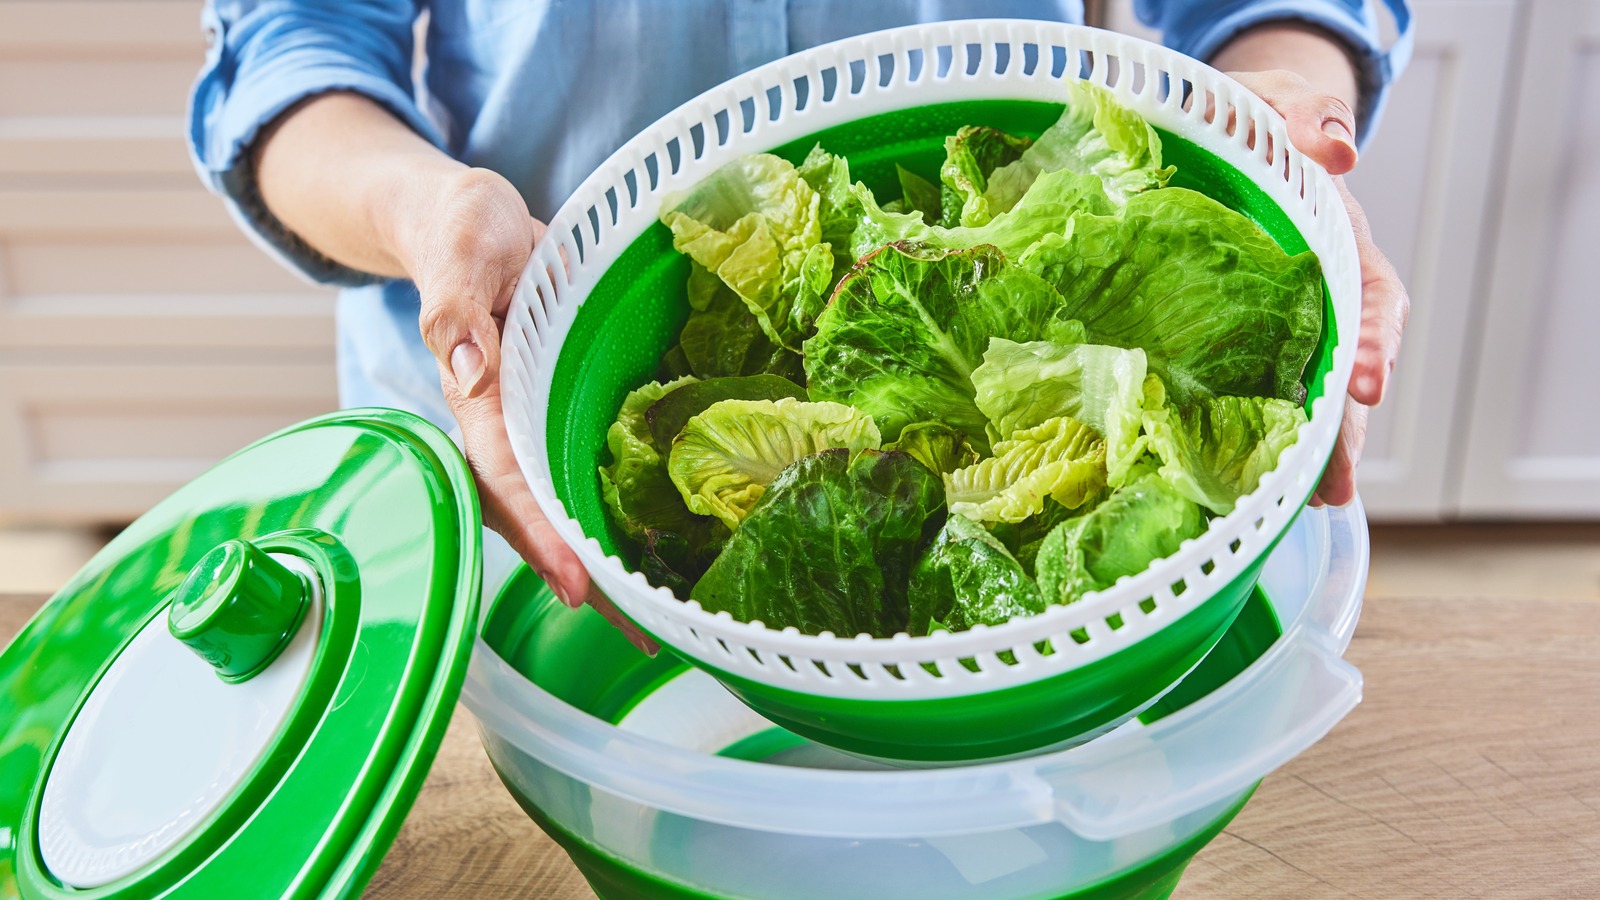 How to Use a Salad Spinner to Easily Clean Greens - walktoeat